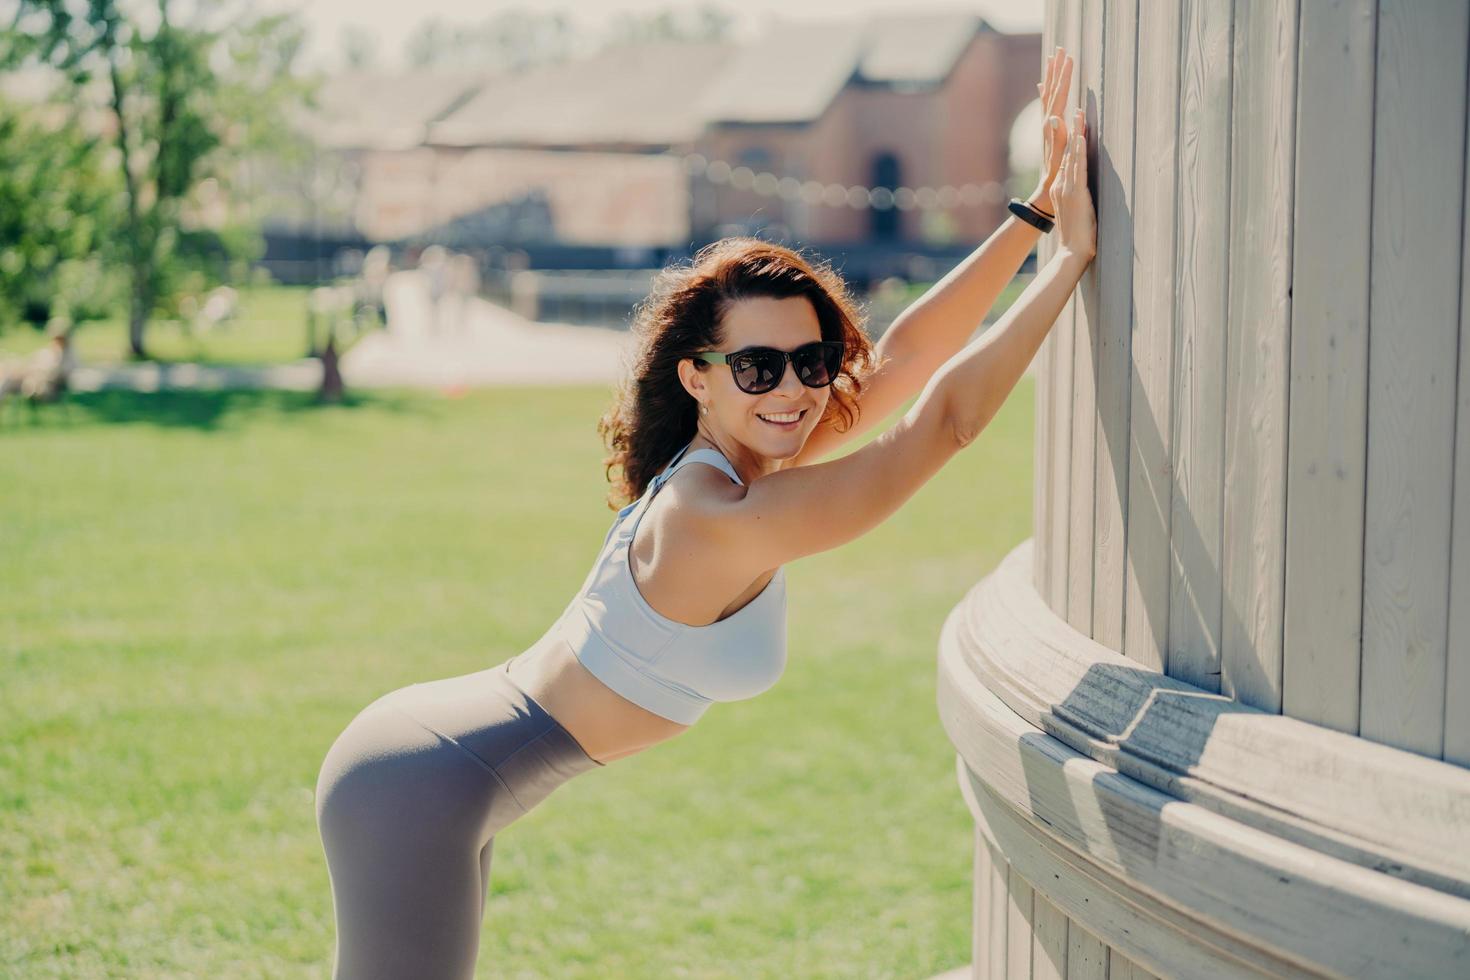 Slim woman with perfect body shapes leans with hands at something smiles positively dressed in top and leggings poses outdoor has fitness training during summer time. People and exercising concept photo